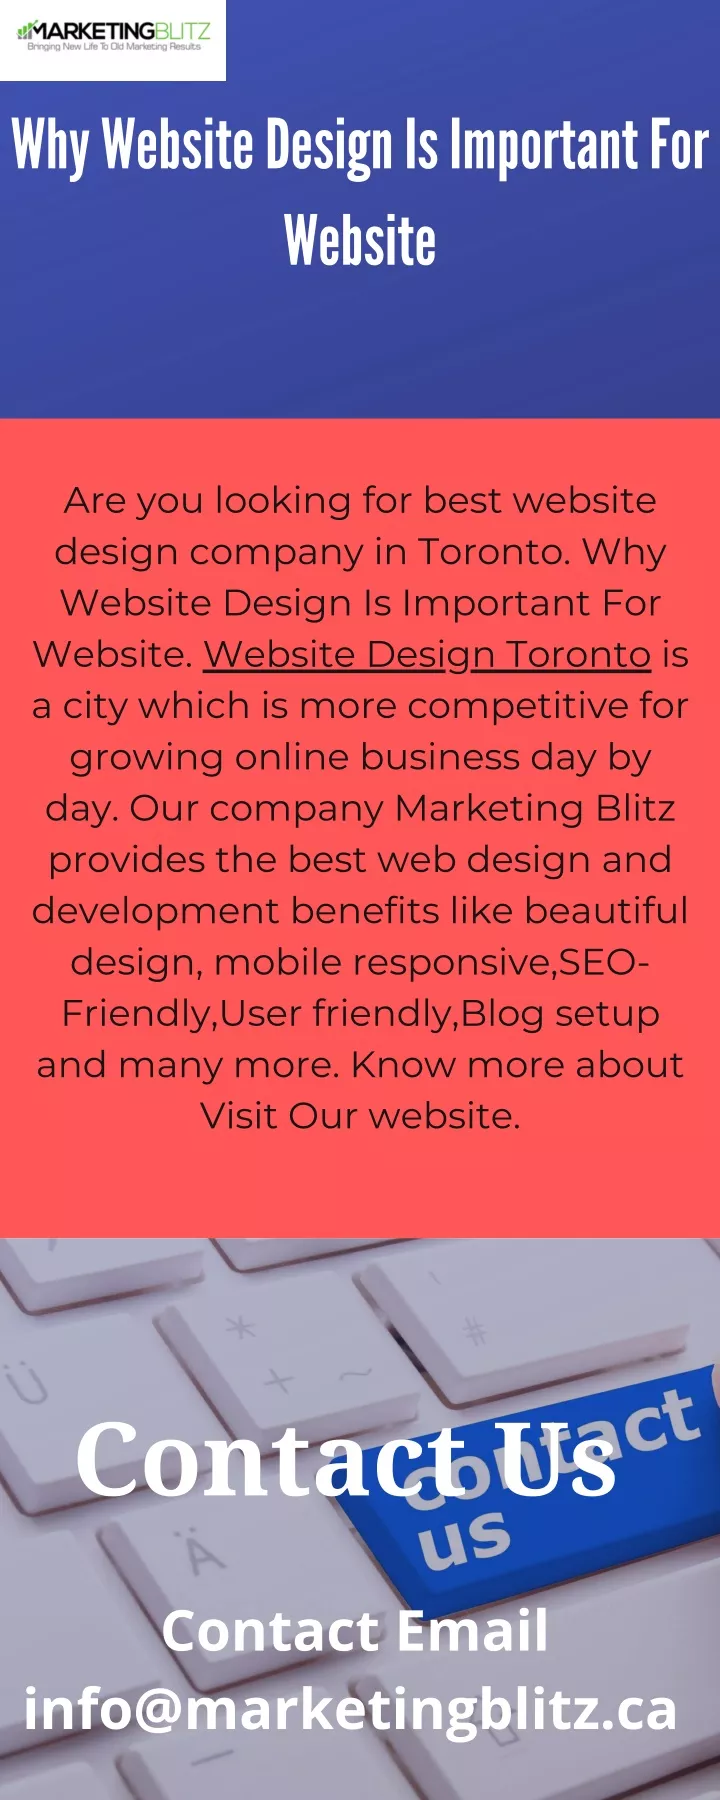 why website design is important for website